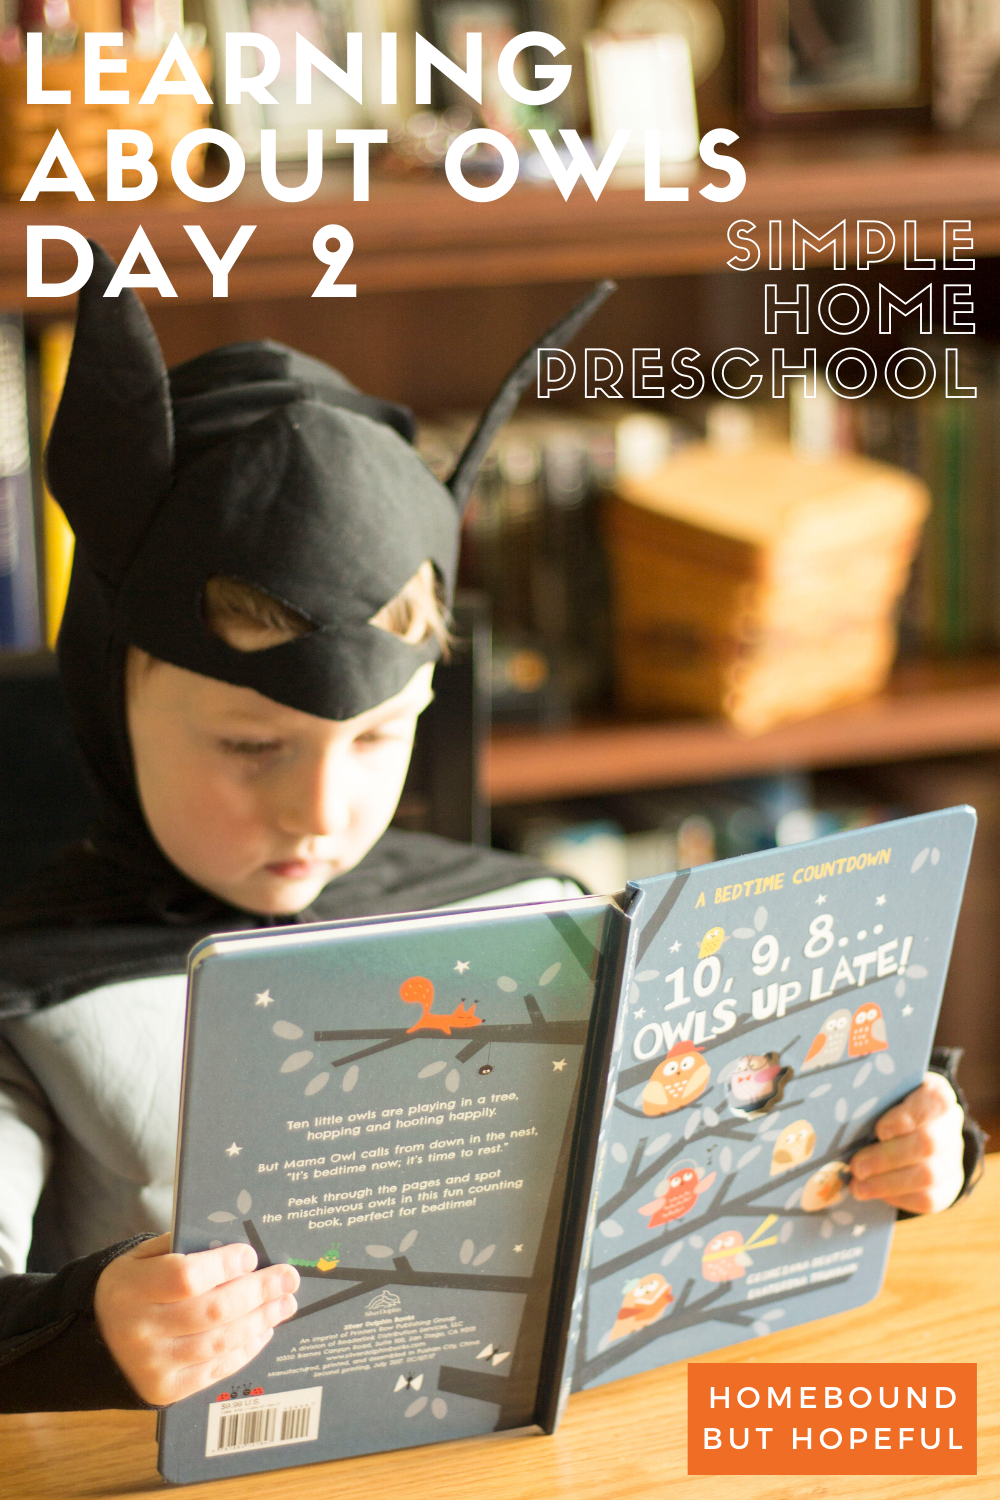 Day 2 of learning all about owls in our home preschool brought coloring, counting, and more! Check it out on the blog! #homeschool #homepreschool #homeeducation